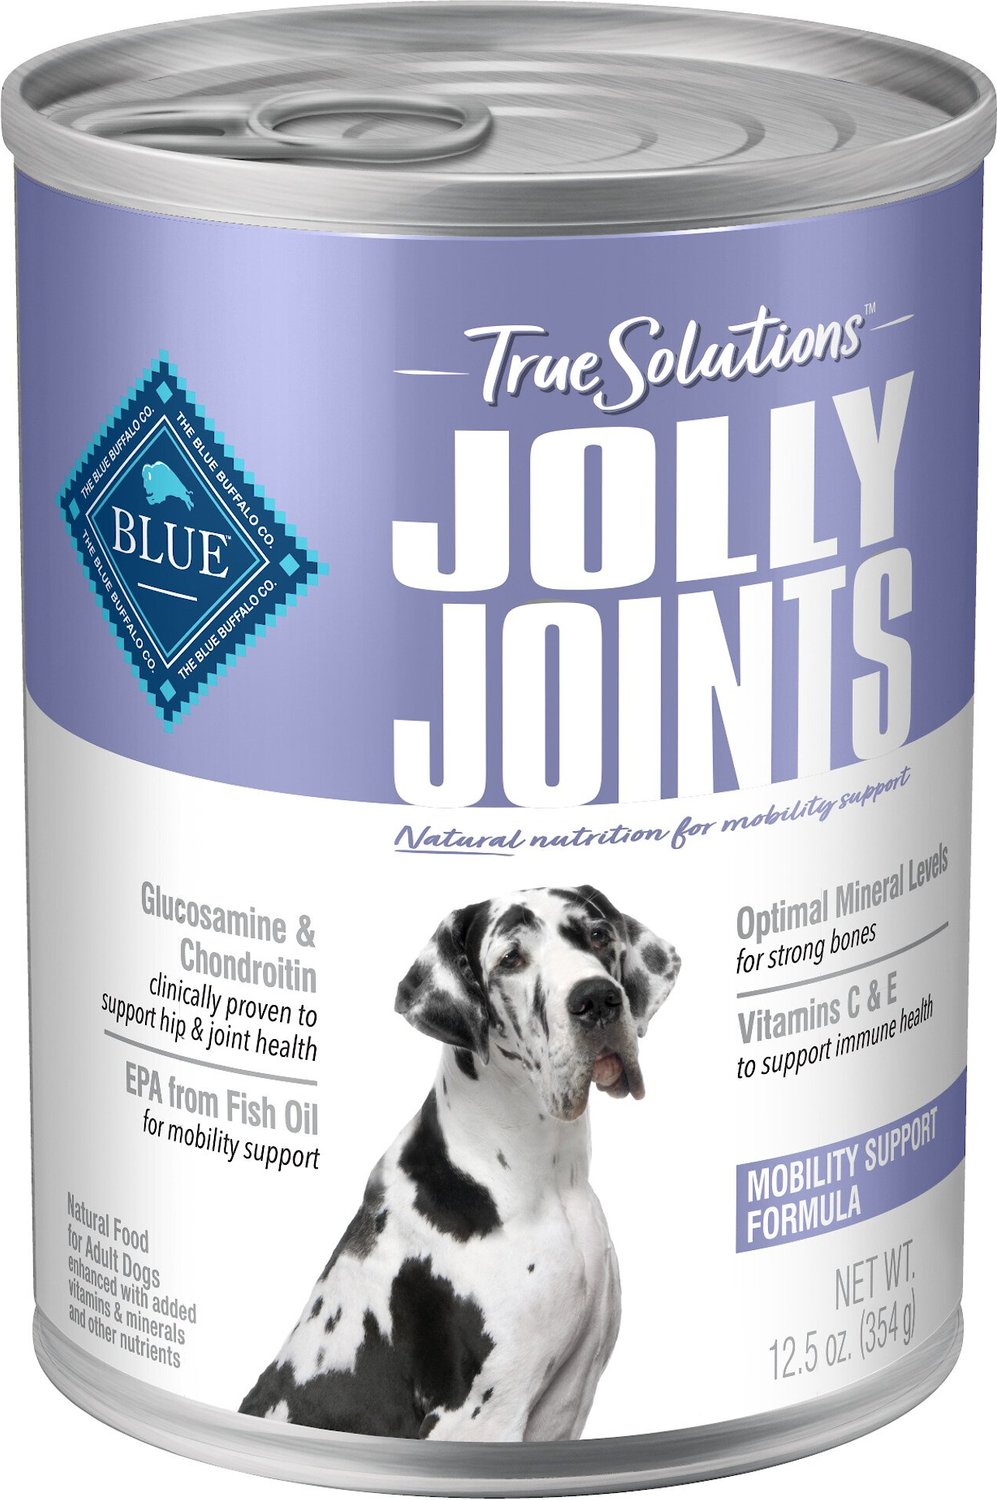 Blue Buffalo True Solutions Jolly Joints Natural Mobility Support Cibo per cani umido per adulti